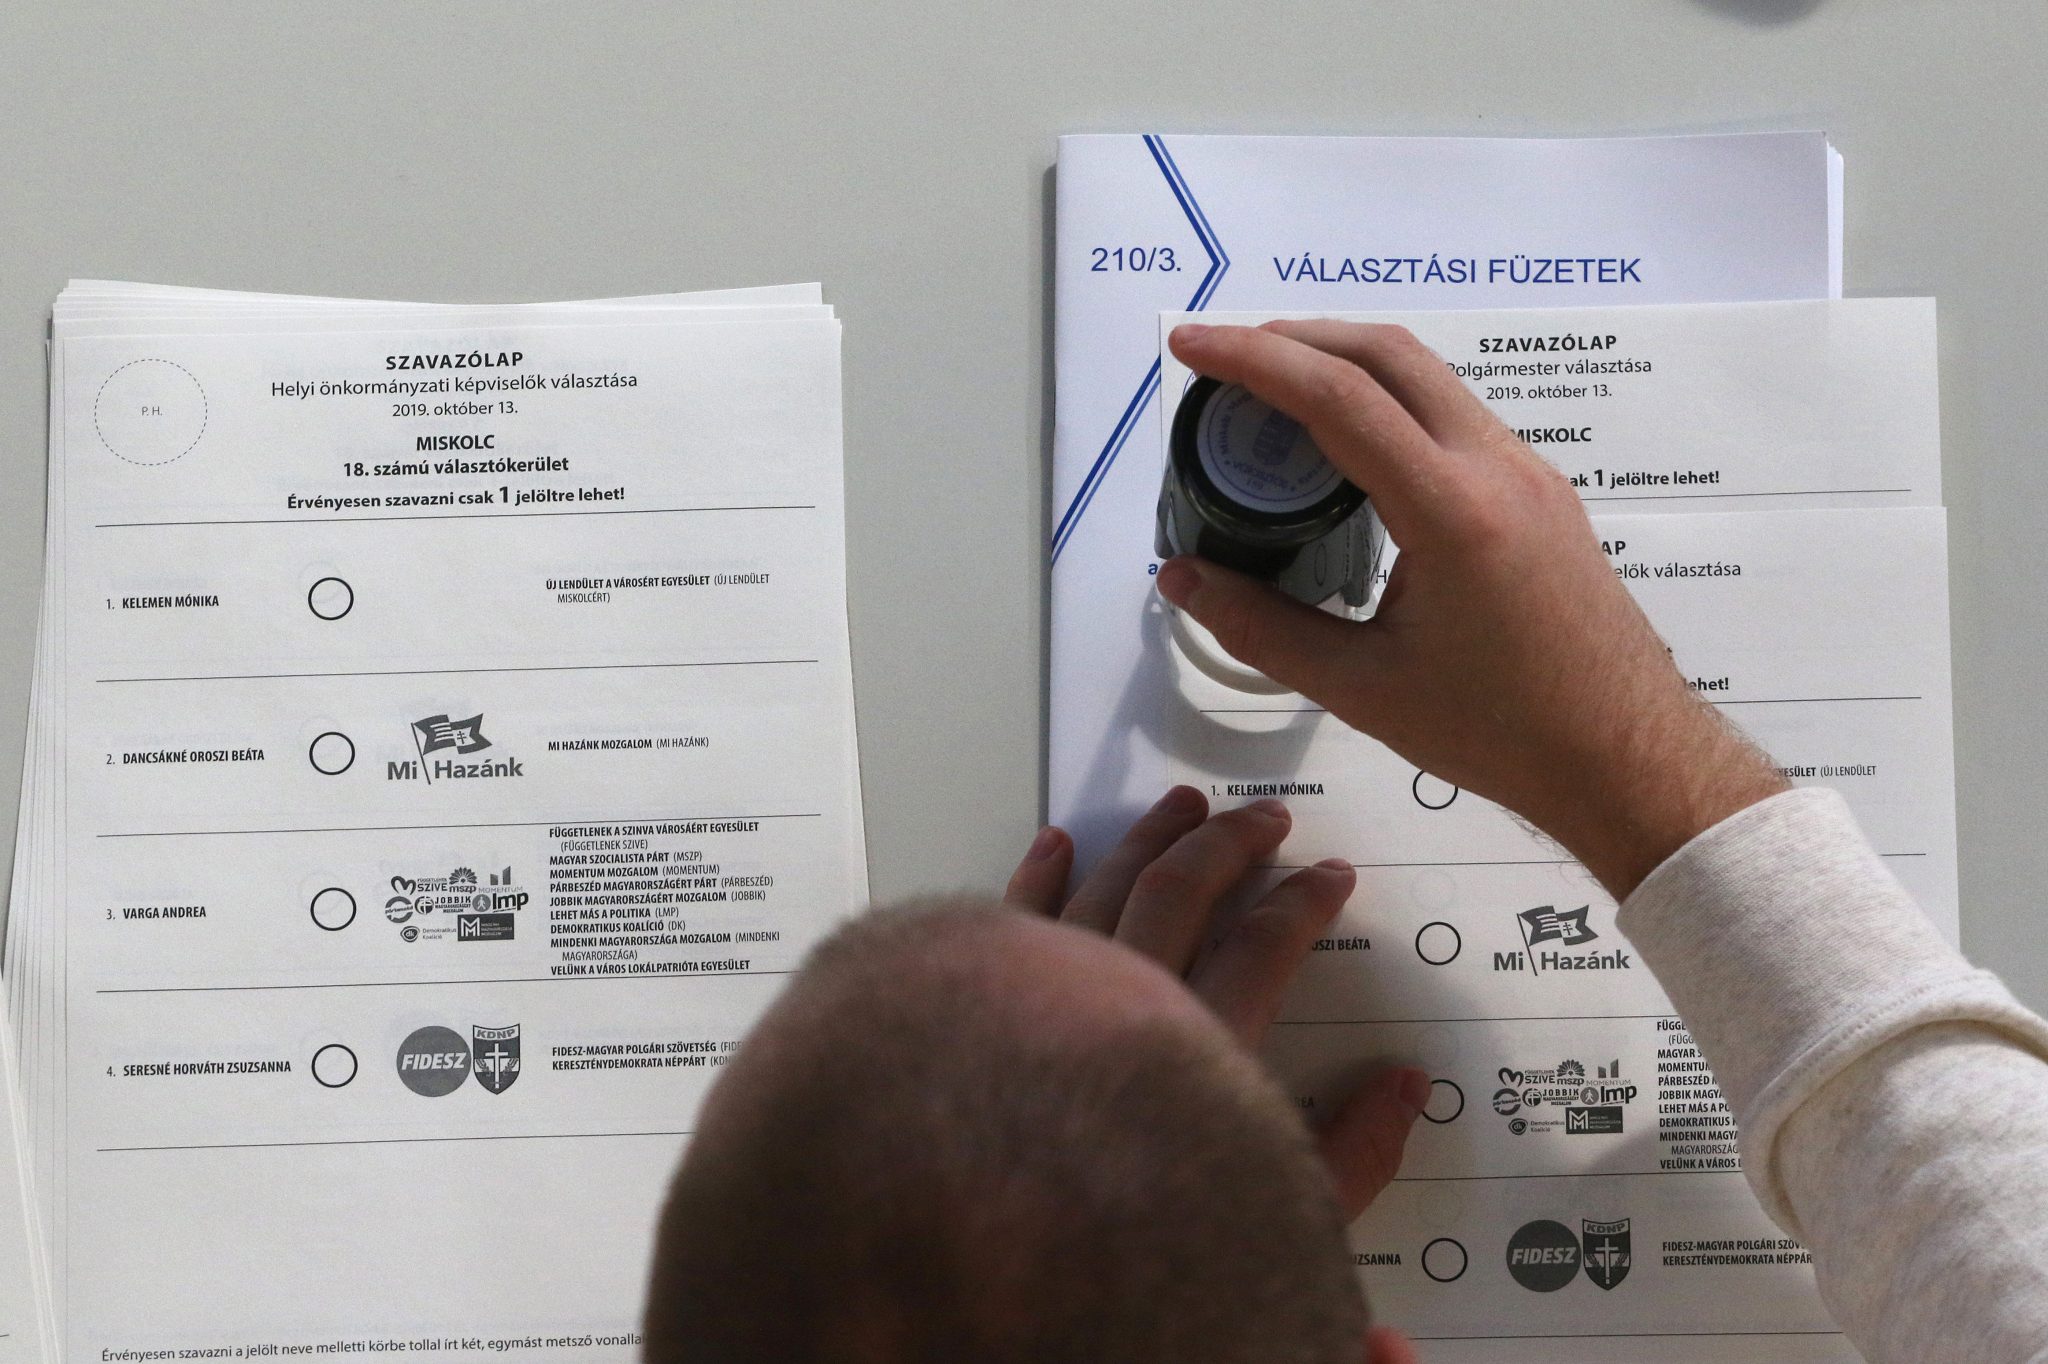 New Election Law Allows Photographing of Ballots, Opposition Objects